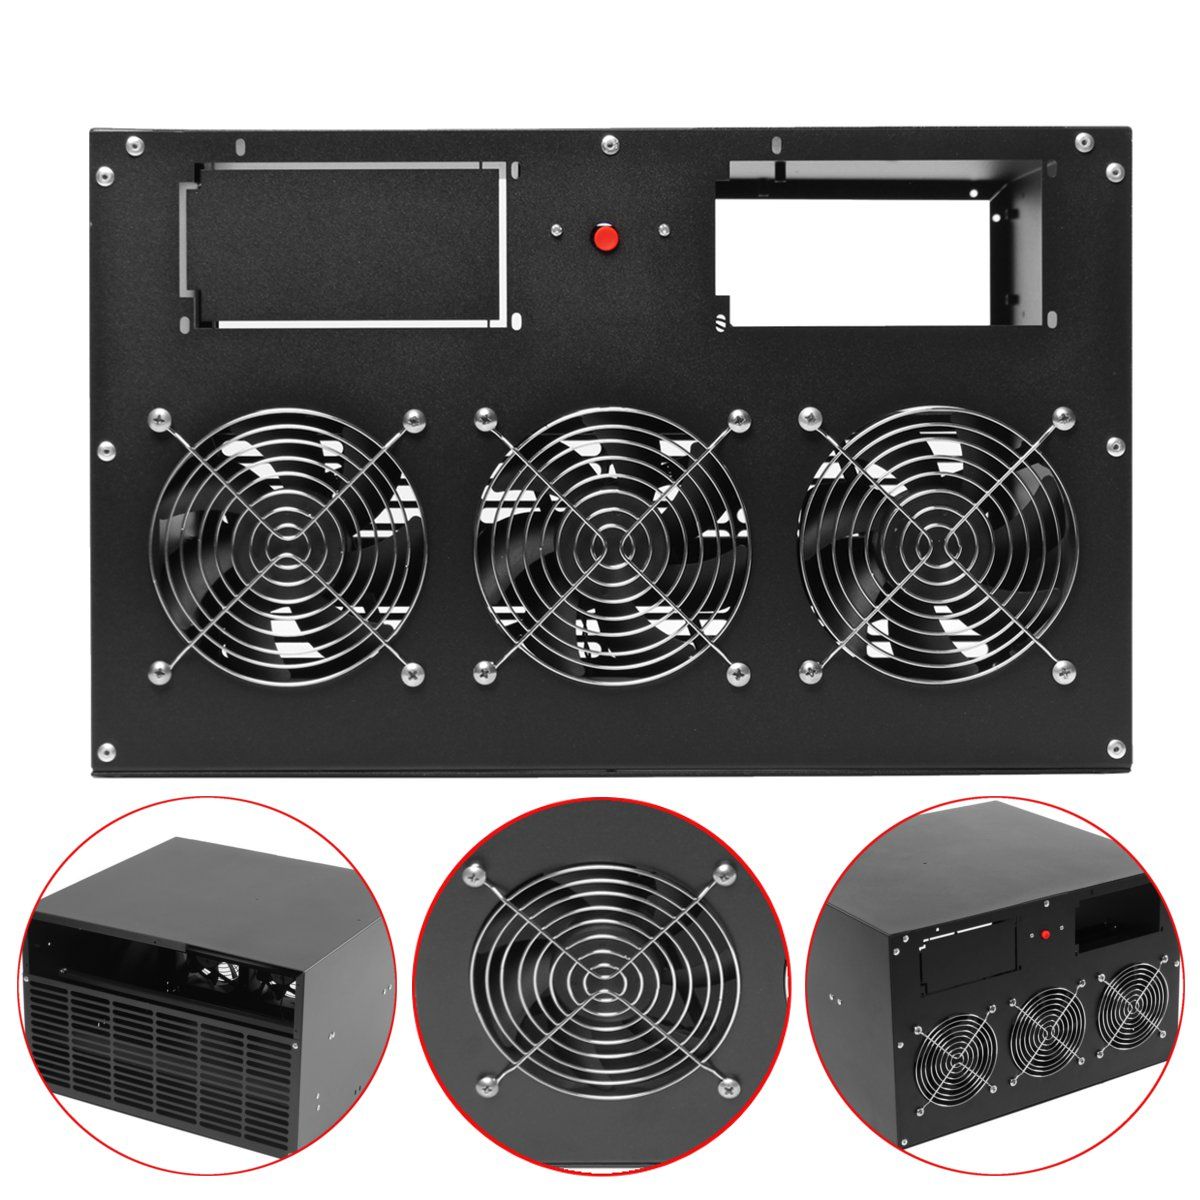 6-GPU-Coin-Miner-Minning-Case-Miner-Mining-Frame-Case-Mining-Rig-Case-with-3-Fans-1269872